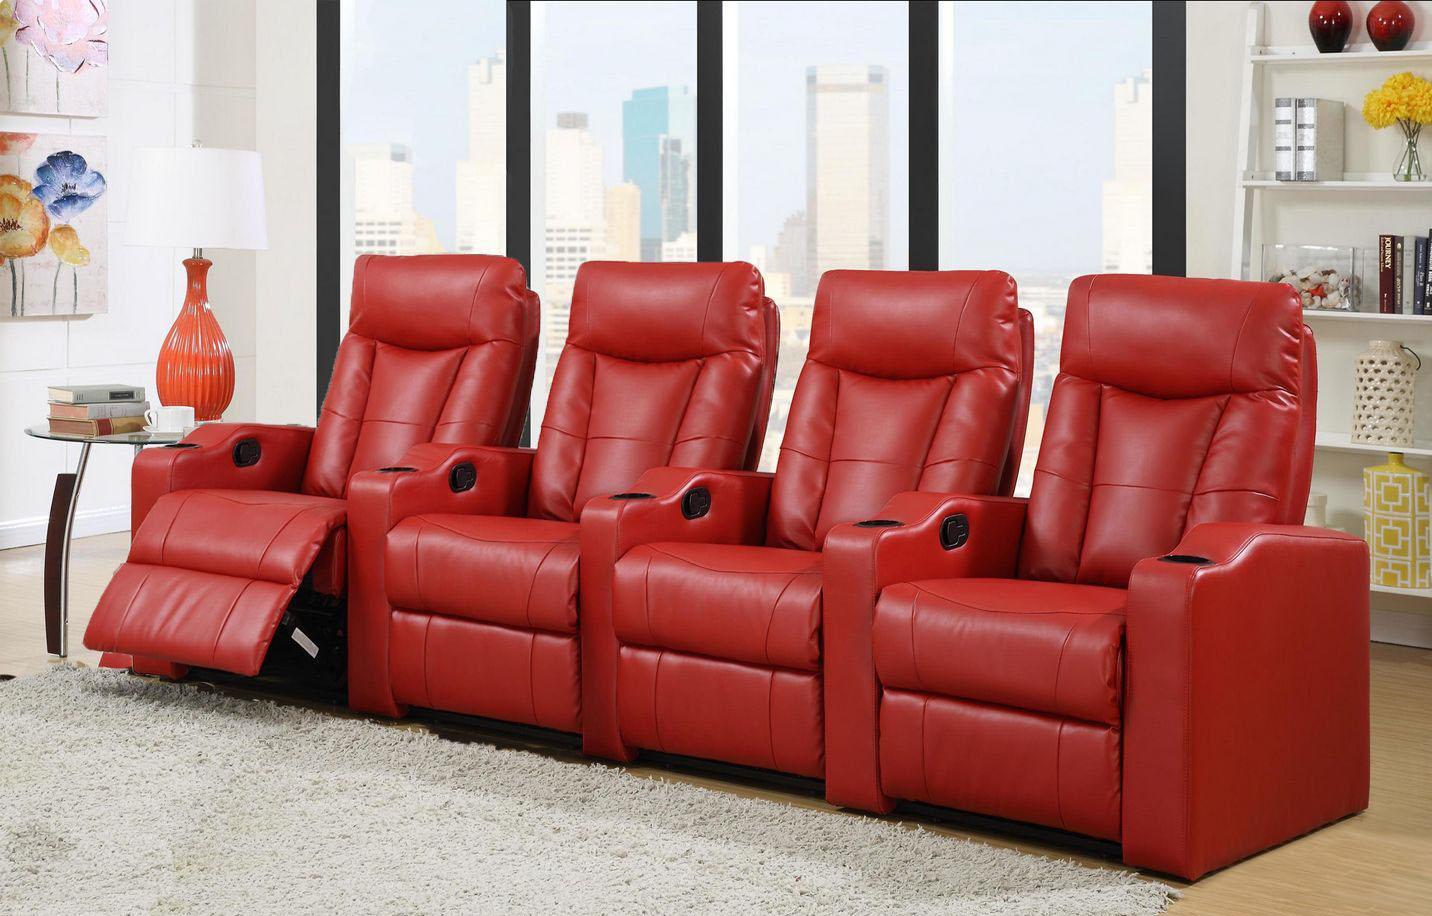 

    
Soflex Noor Red Bonded Leather Reclining Home Theater Seating Row of 4 Seats
